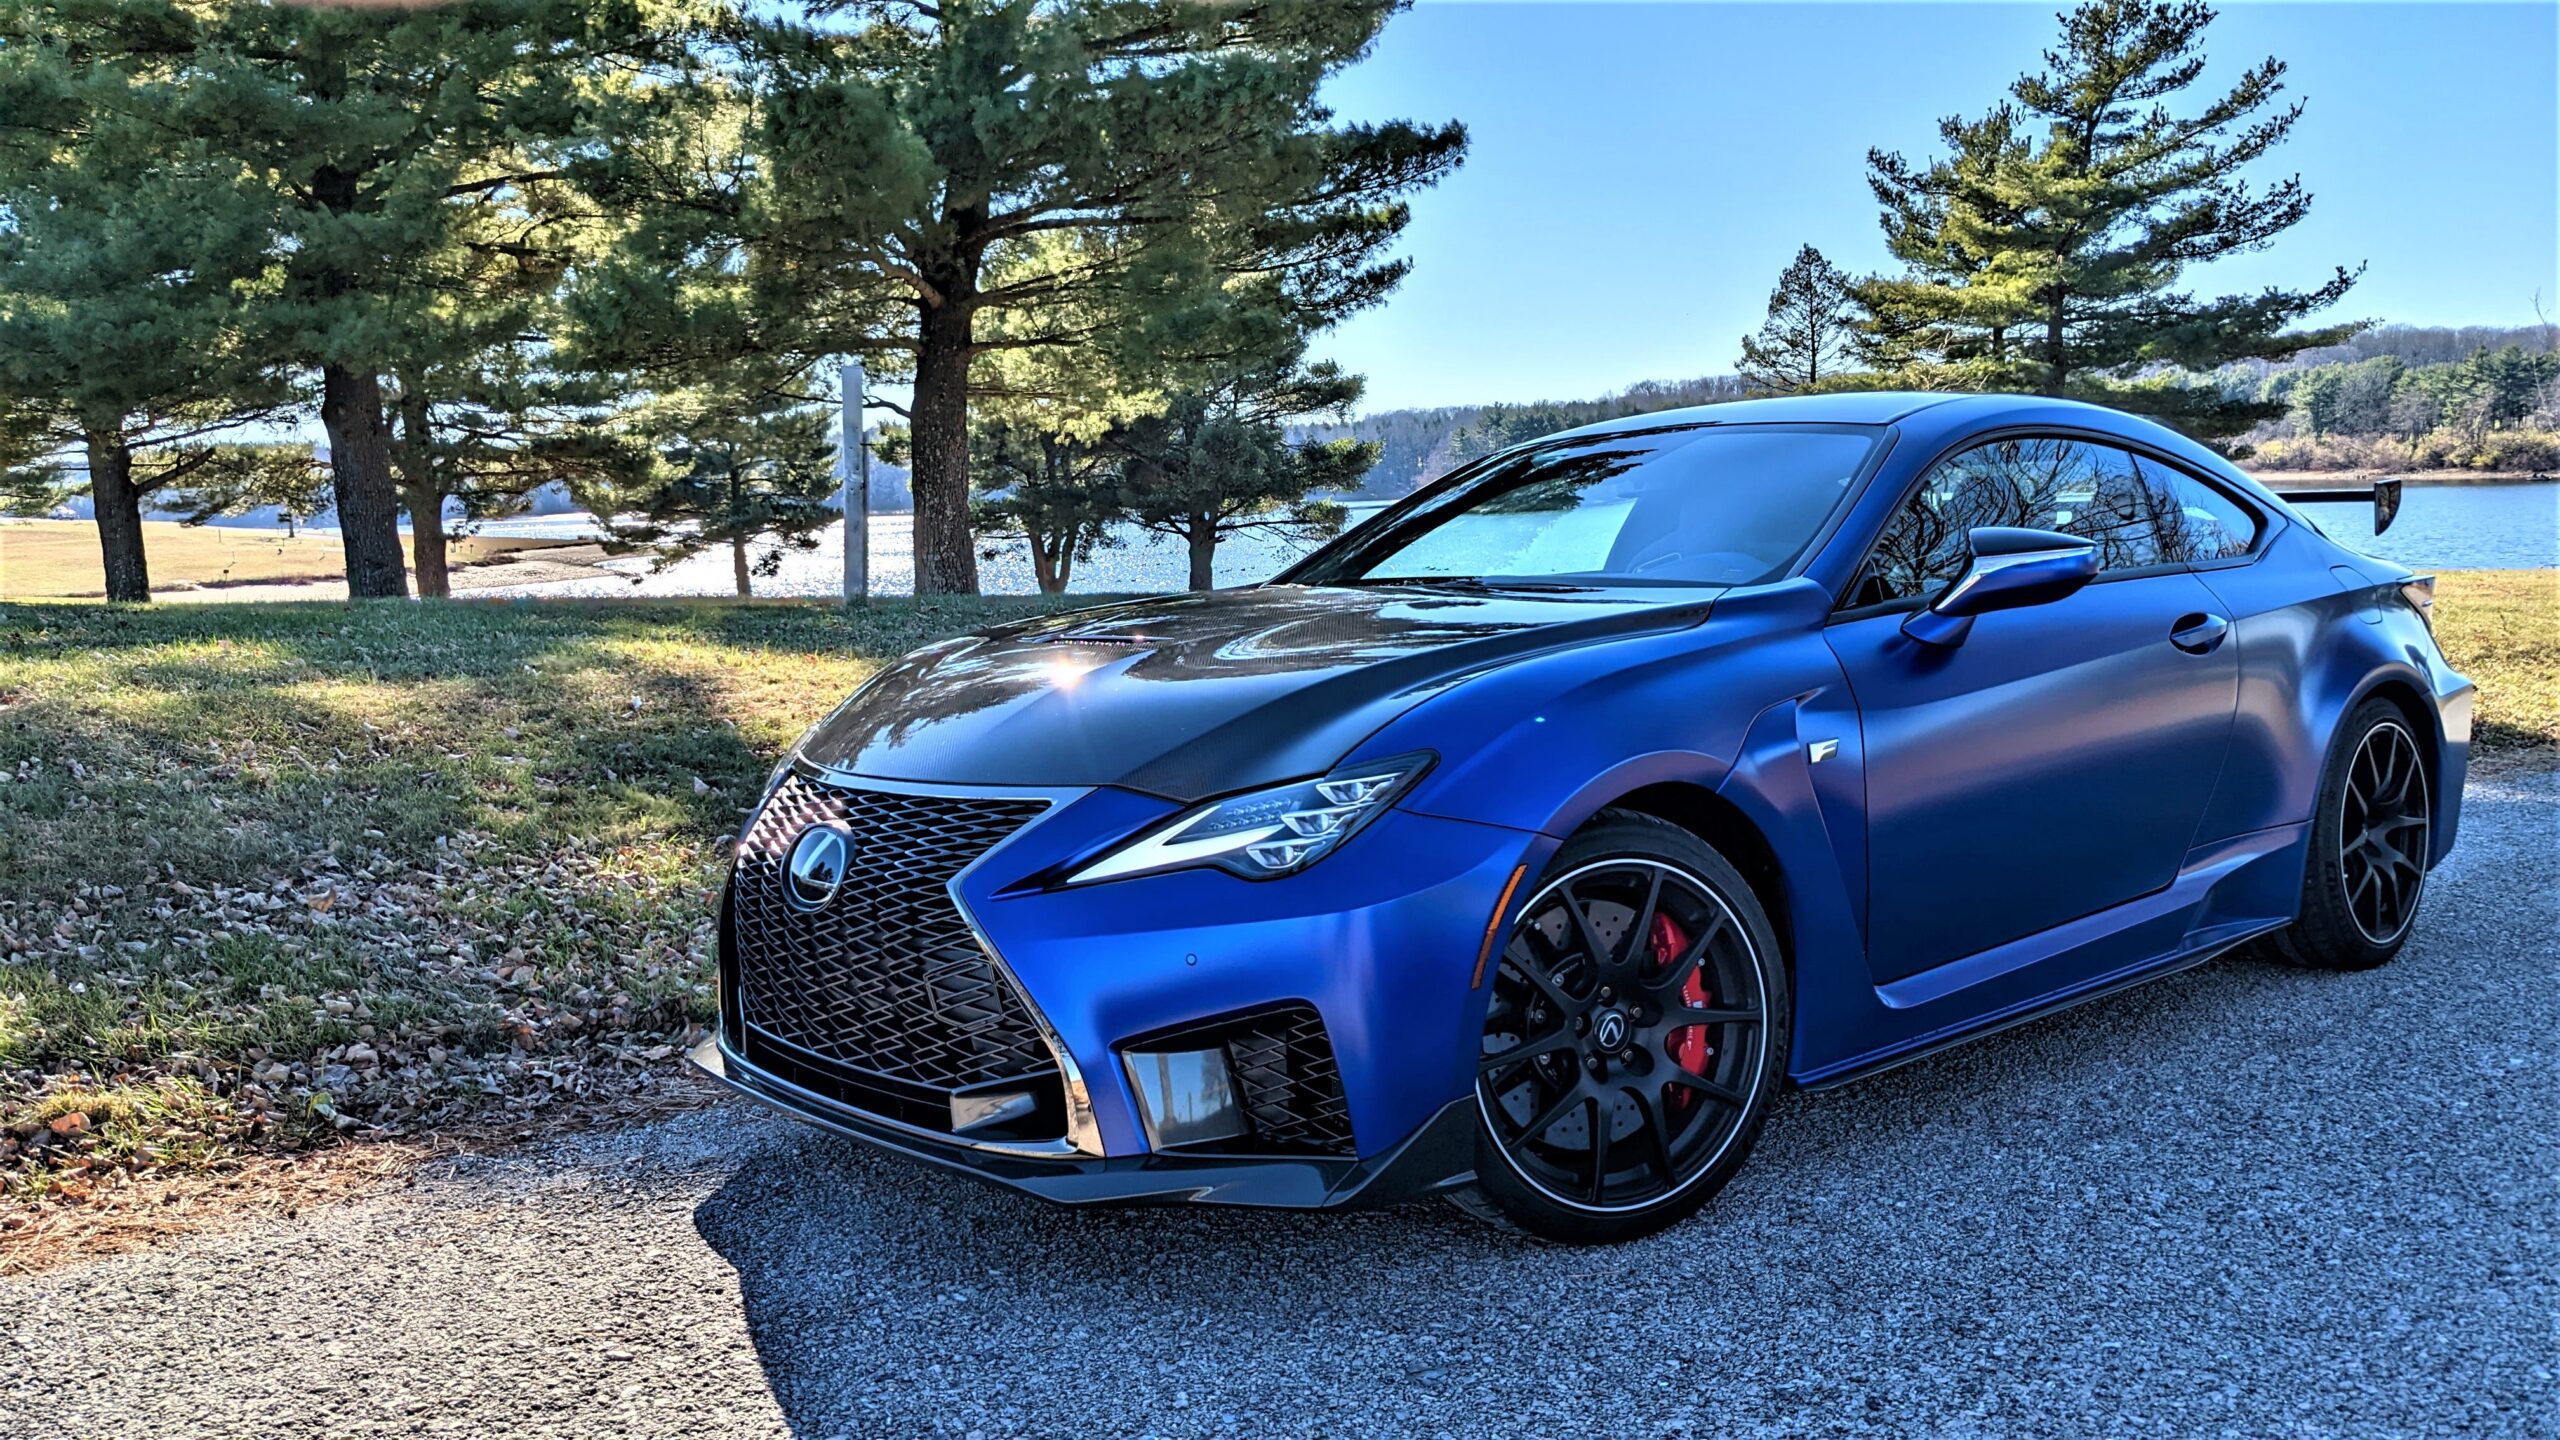 2022 Lexus RC F Fuji Speedway Edition: Pros and Cons - Right Foot Down